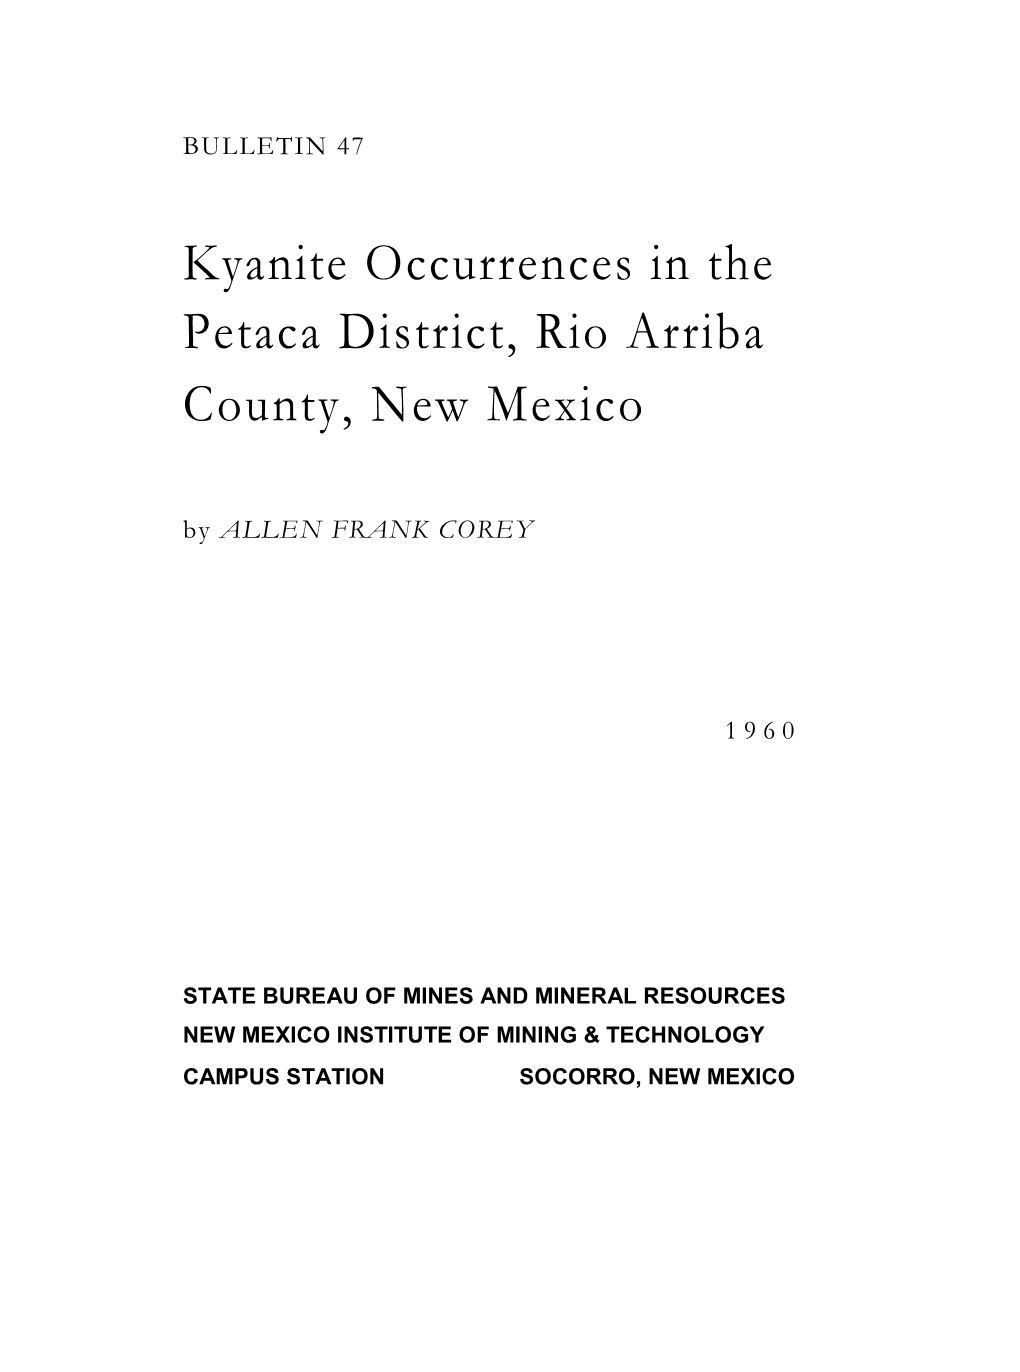 Kyanite Occurrences in the Petaca District, Rio Arriba County, New Mexico